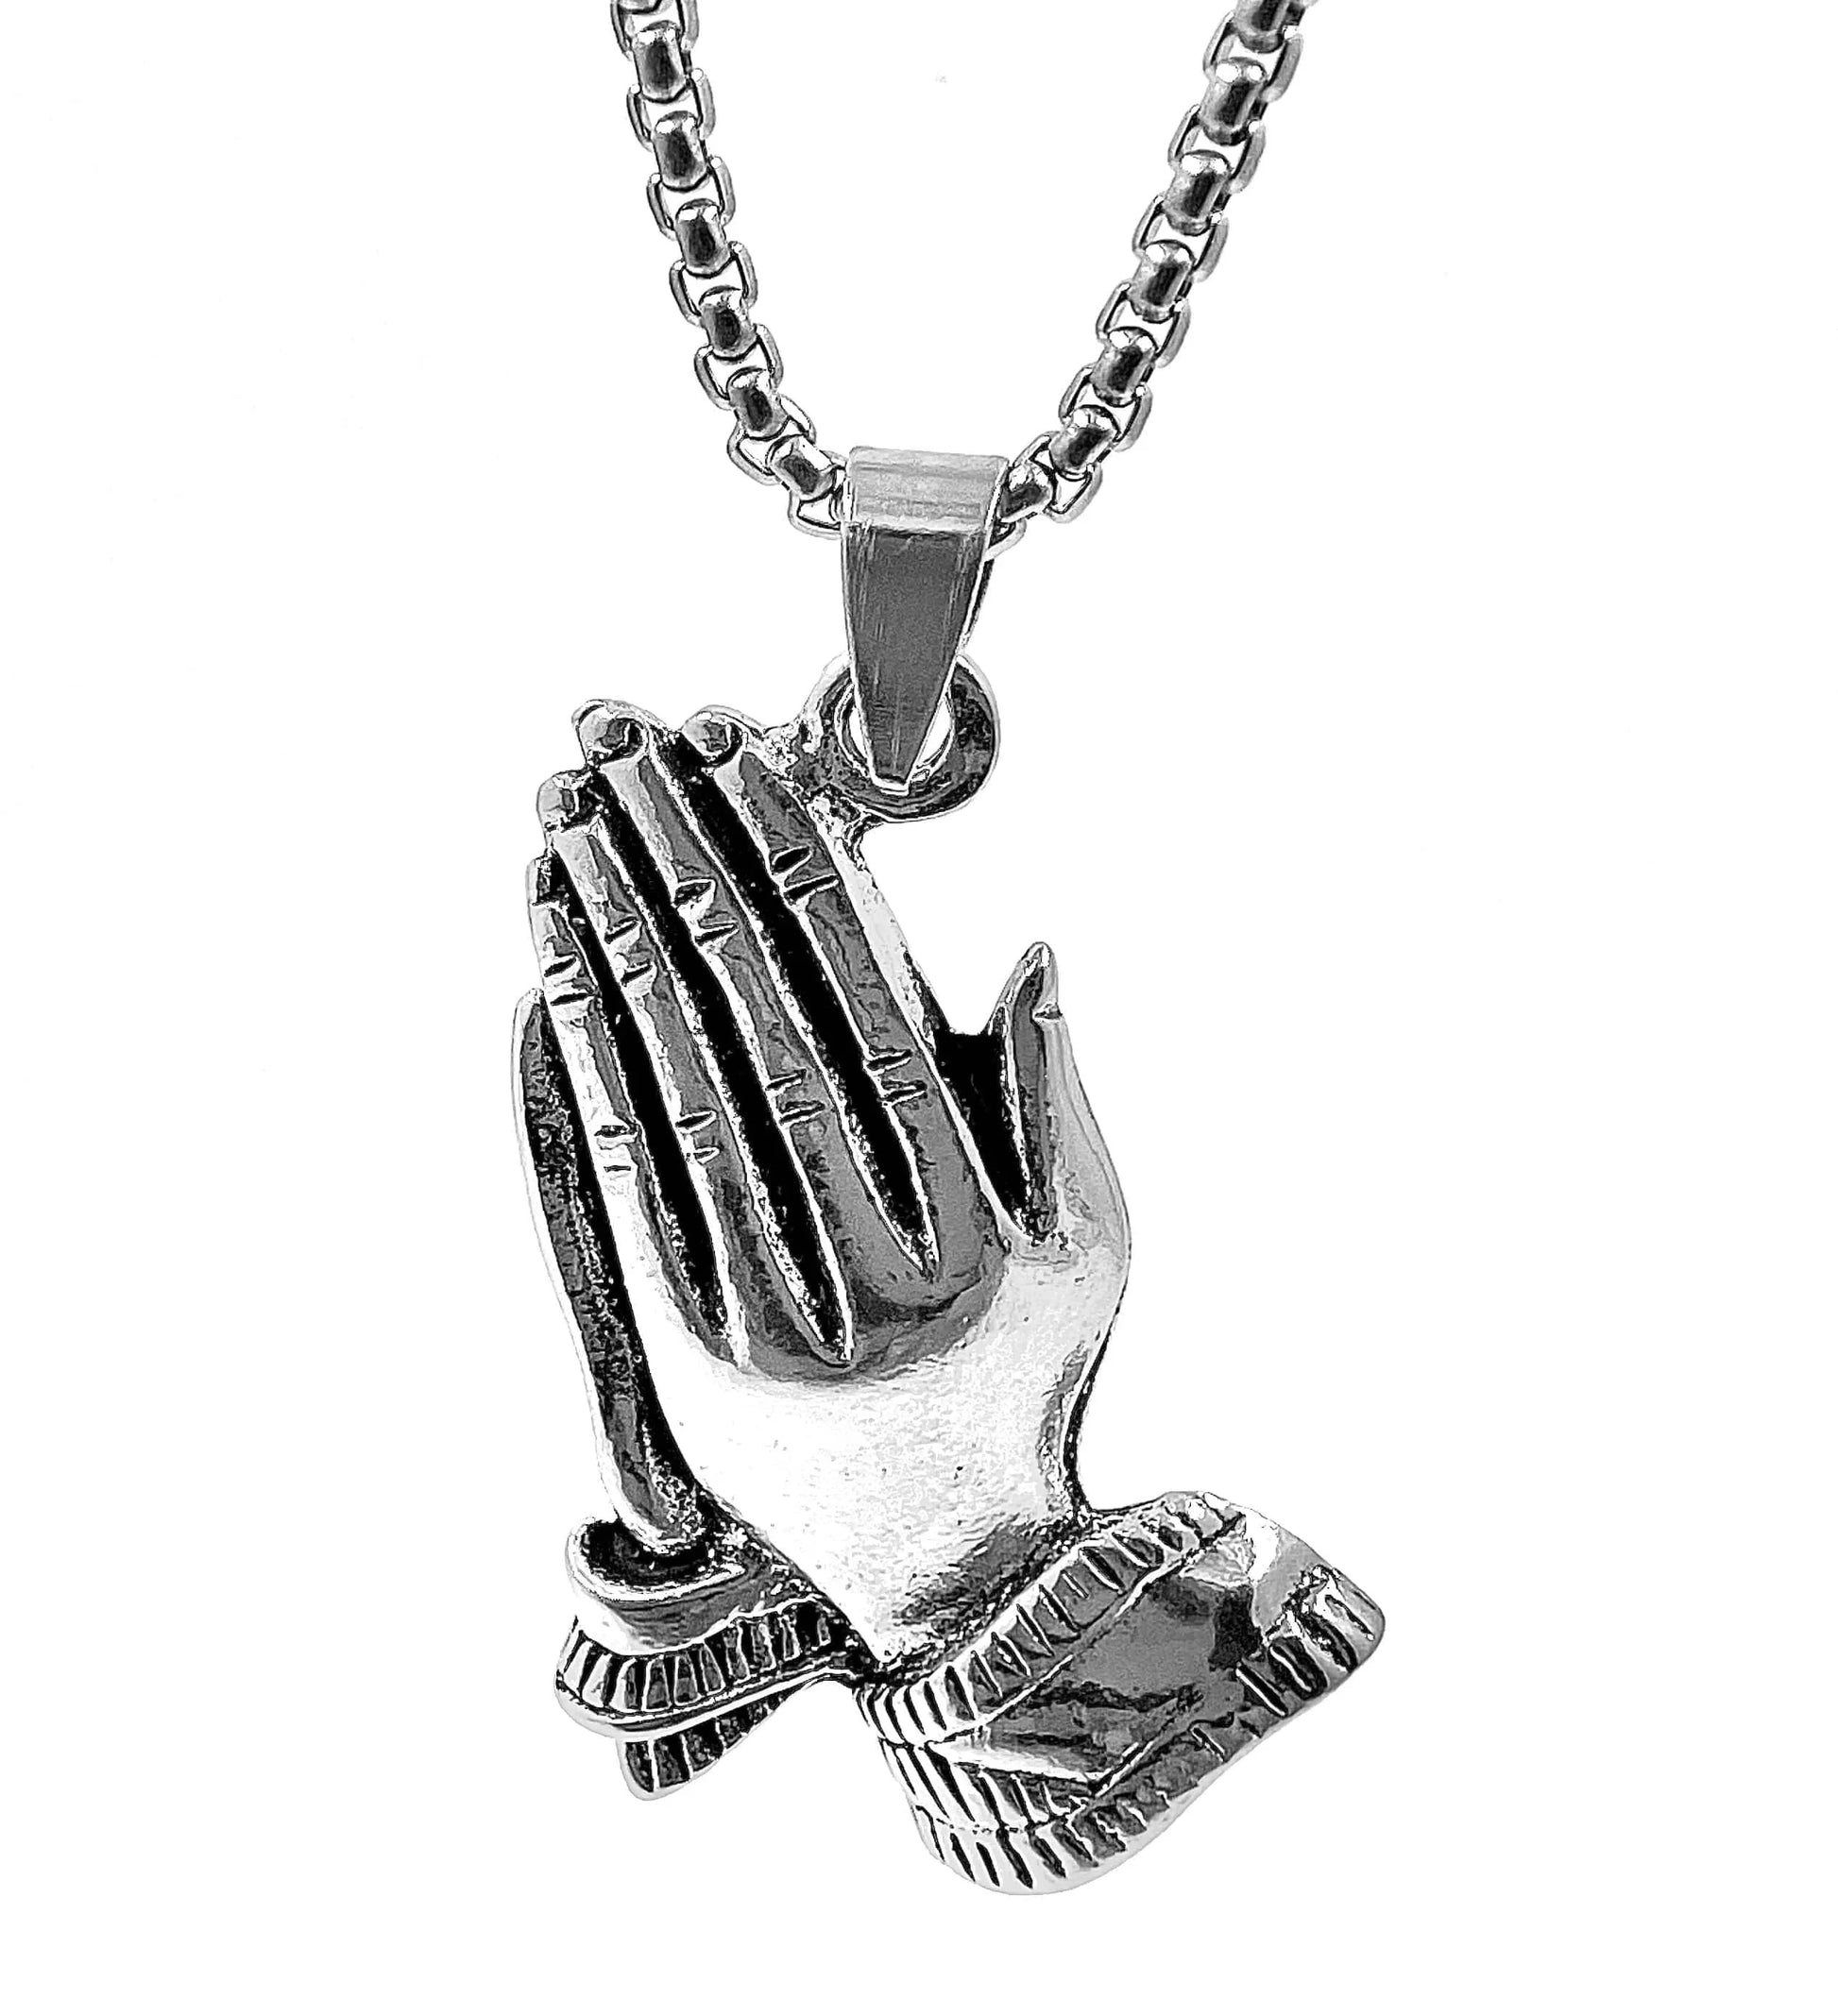 THE MEN THING Alloy Applaud Pendant with Pure Stainless Steel 24inch Chain for Men, Milan trending Style - Round Box Chain & Pendant for Men & Boy